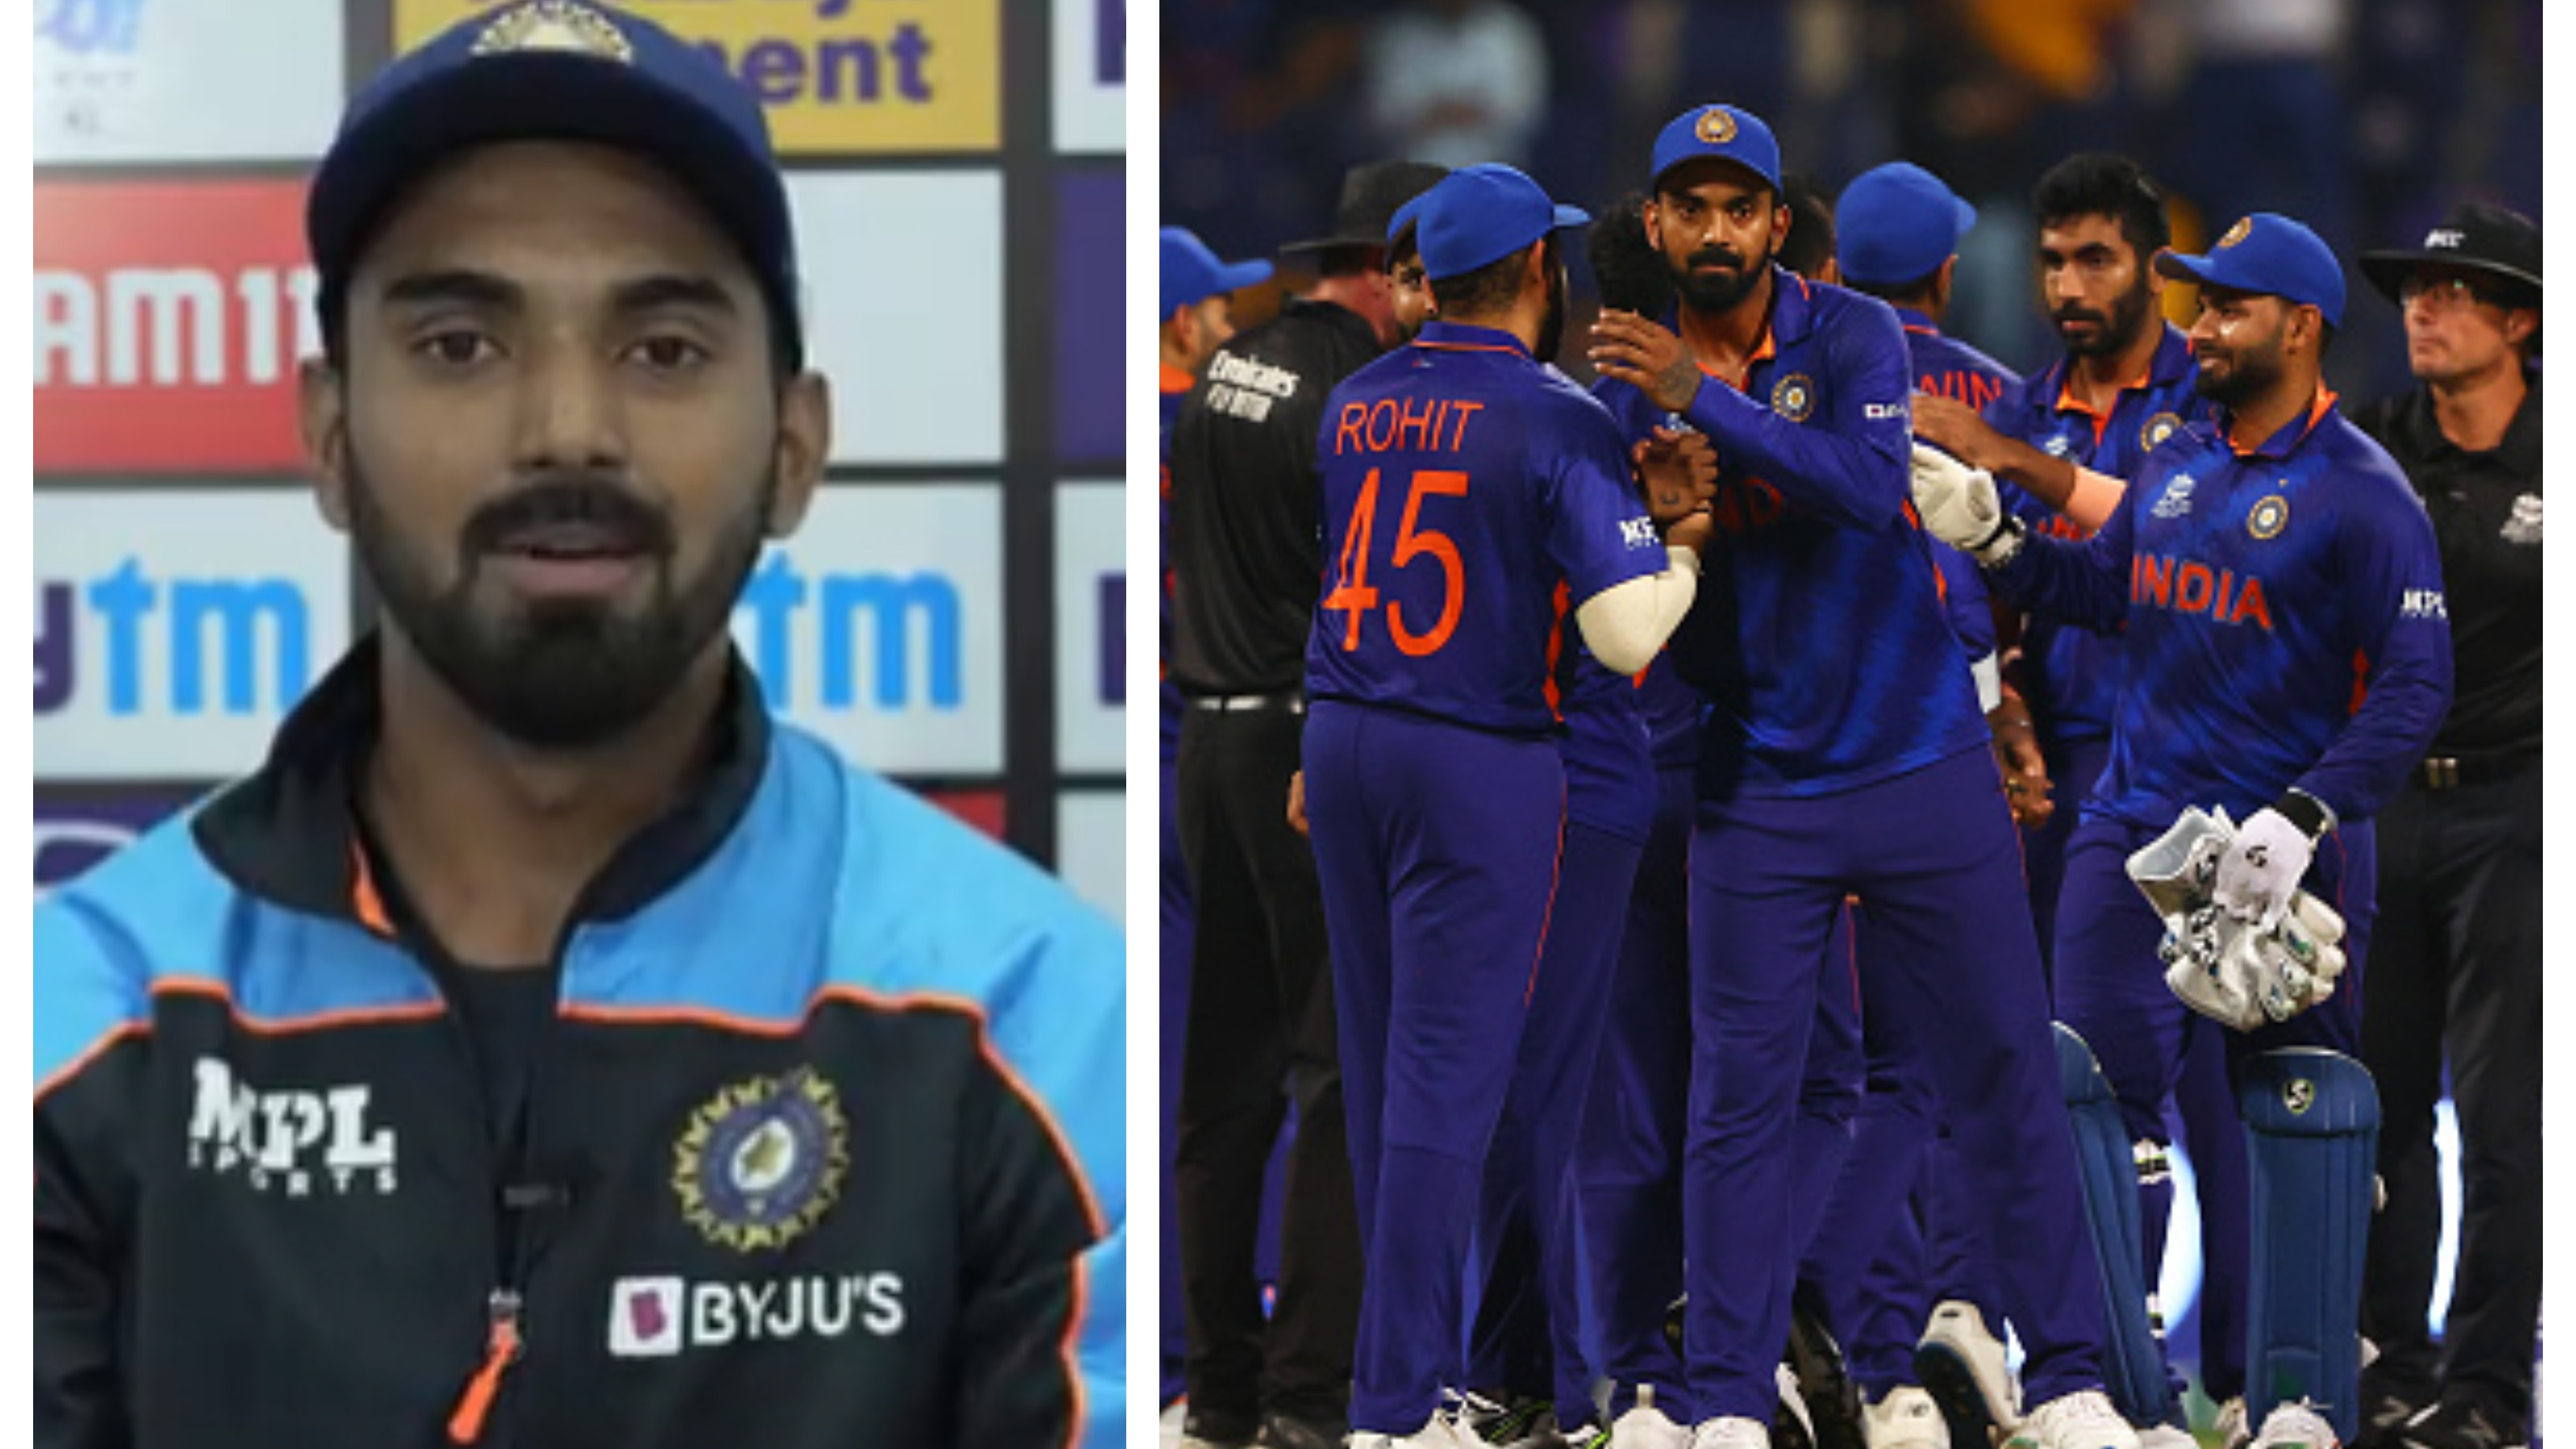 IND v NZ 2021: WATCH – “All of us in the team are excited to play under Rohit”, says KL Rahul ahead of 1st T20I